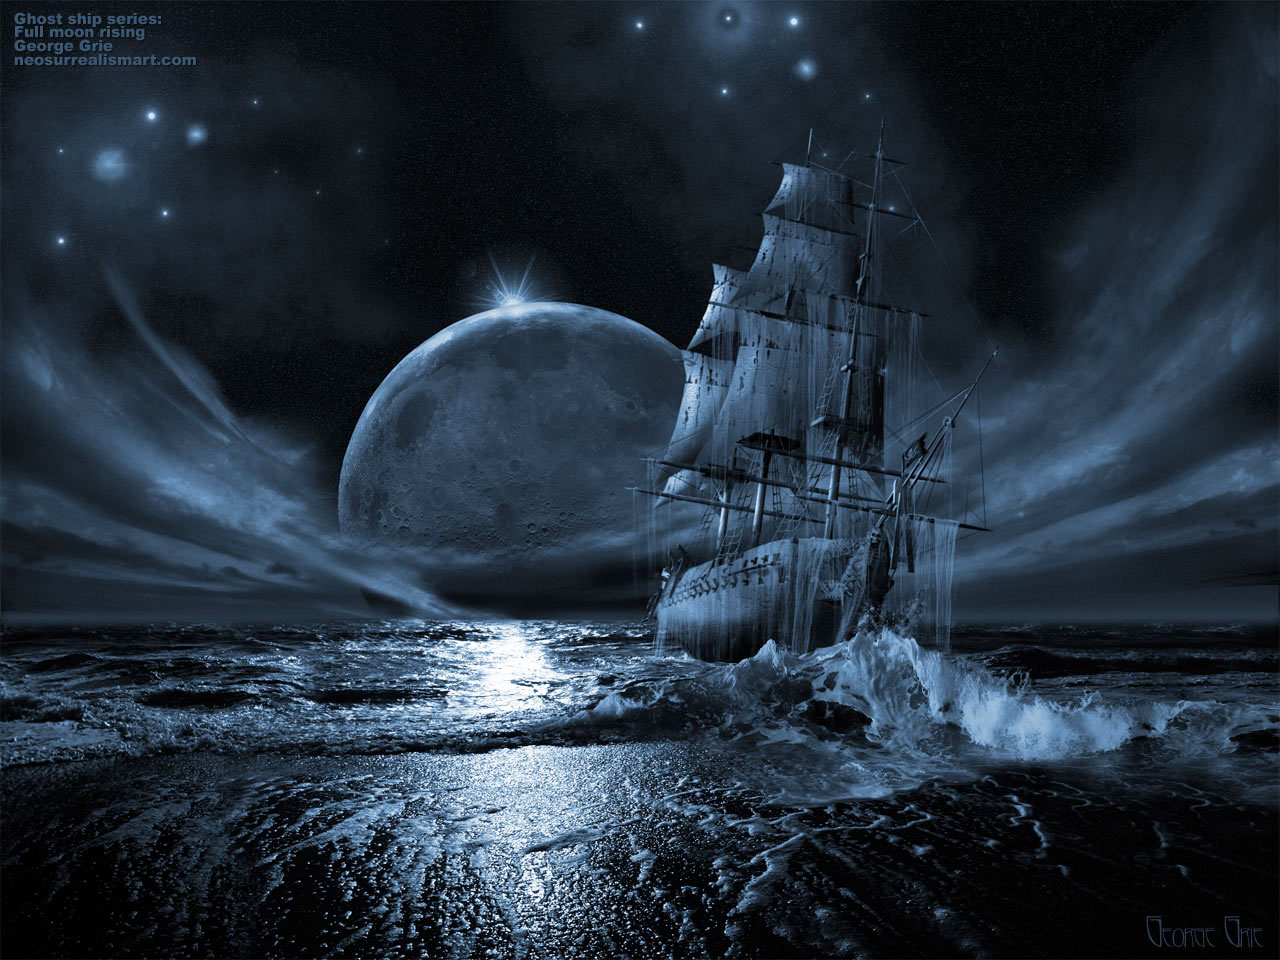 Free computer desktop wallpaper:Ghost ship series: Full moon rising, 3D Digital Art, Fantasy Art, You might not be aware that ghost ships have existed for centuries. Some ghost ships supposed to be crewed by the dead, while some ghost ships are real ships that have disappeared or sunk tragically. Full Moons associated with temporal insanity.